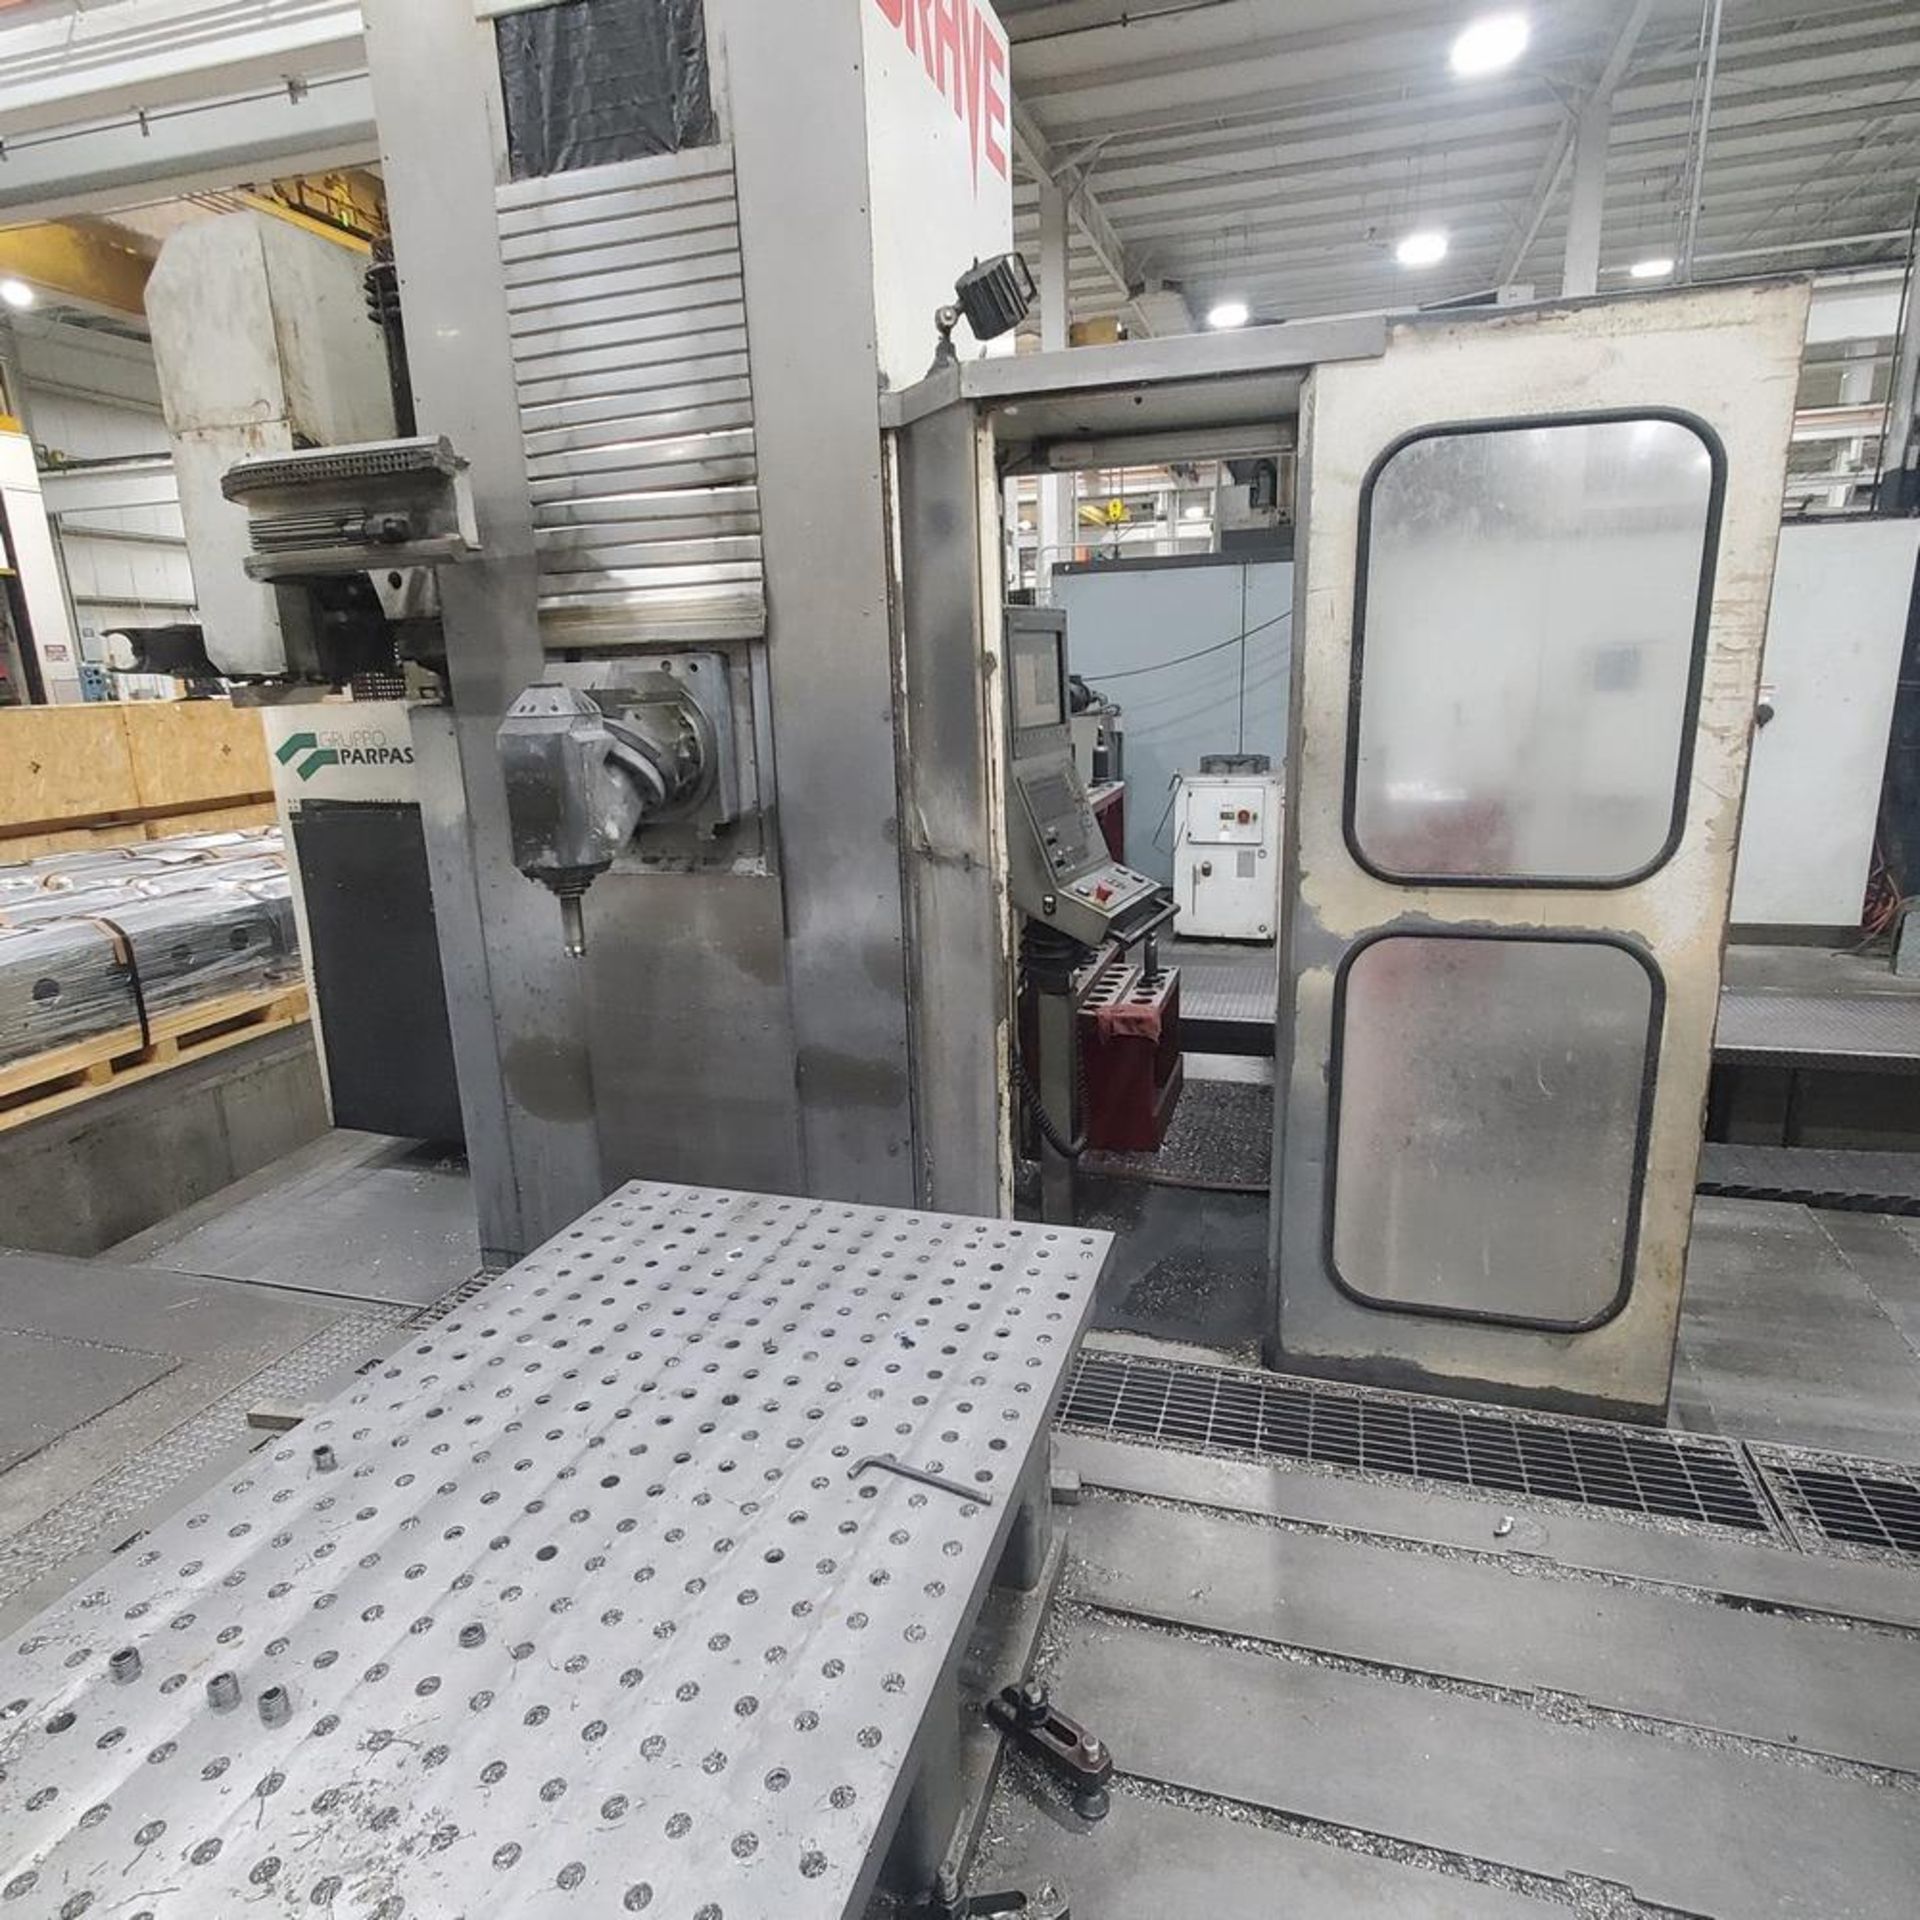 Parpas OMV Brave Multi Axis Machining Center, 236" X 81" X 47 " Travels, 120,000 LBS Table Load - Image 6 of 12